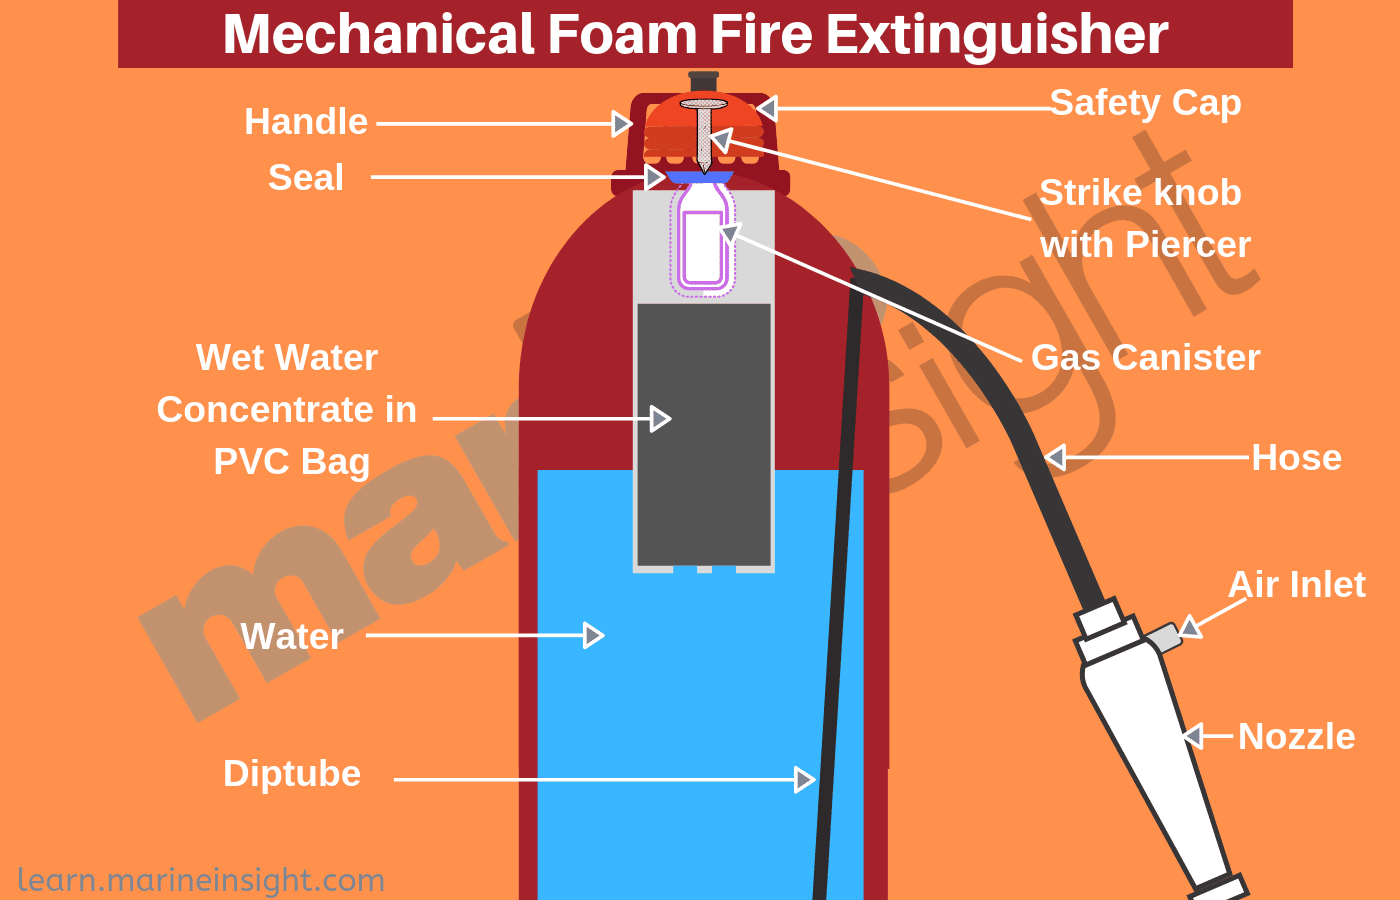 fire extinguishers and their uses